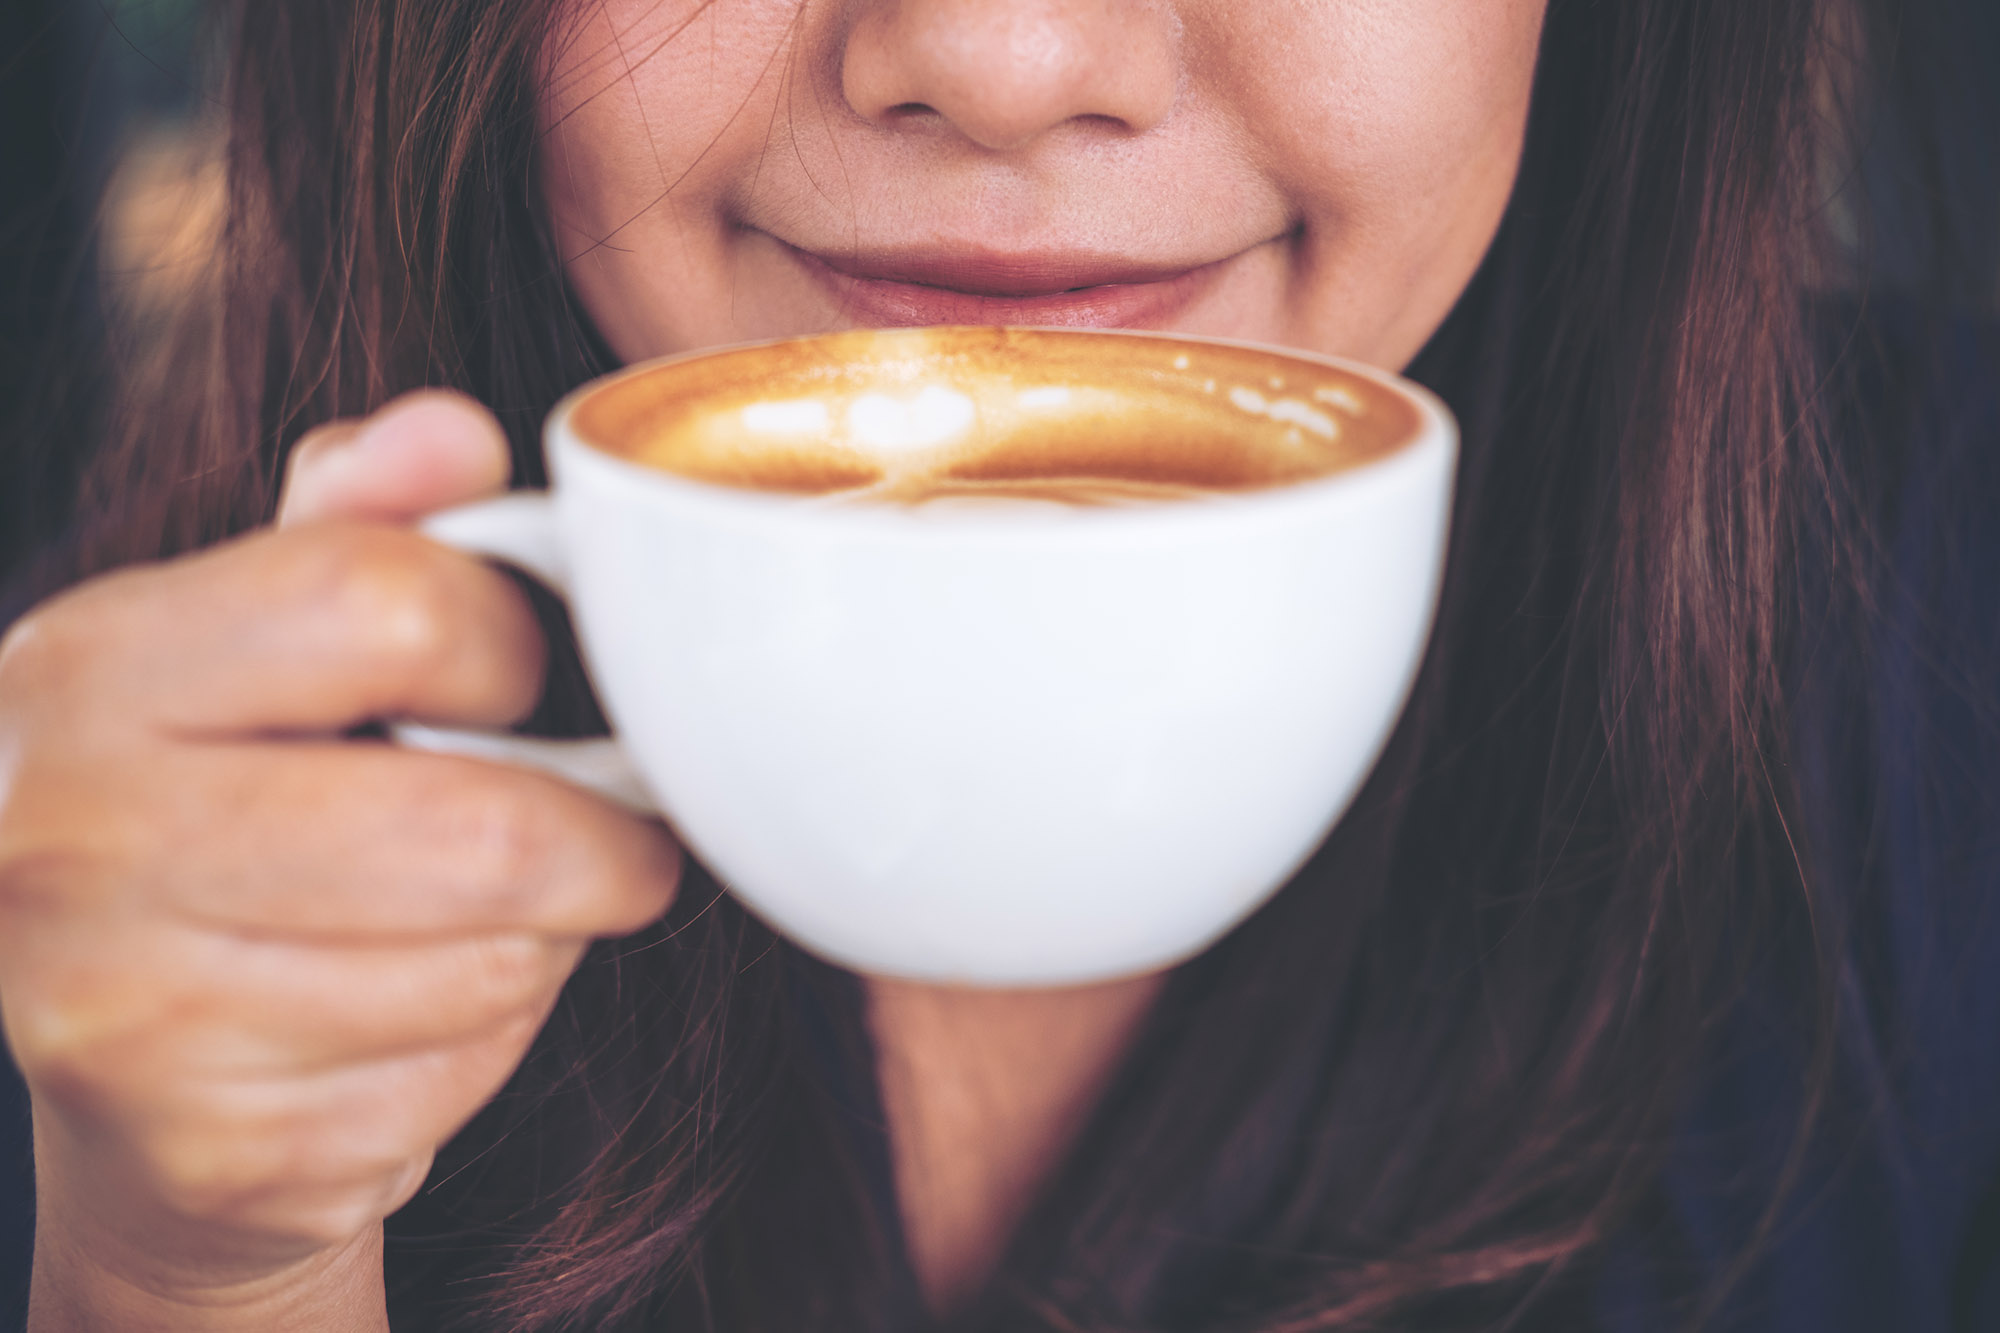 How do you usually drink coffee? Three simple steps to make you feel the deeper level of coffee!